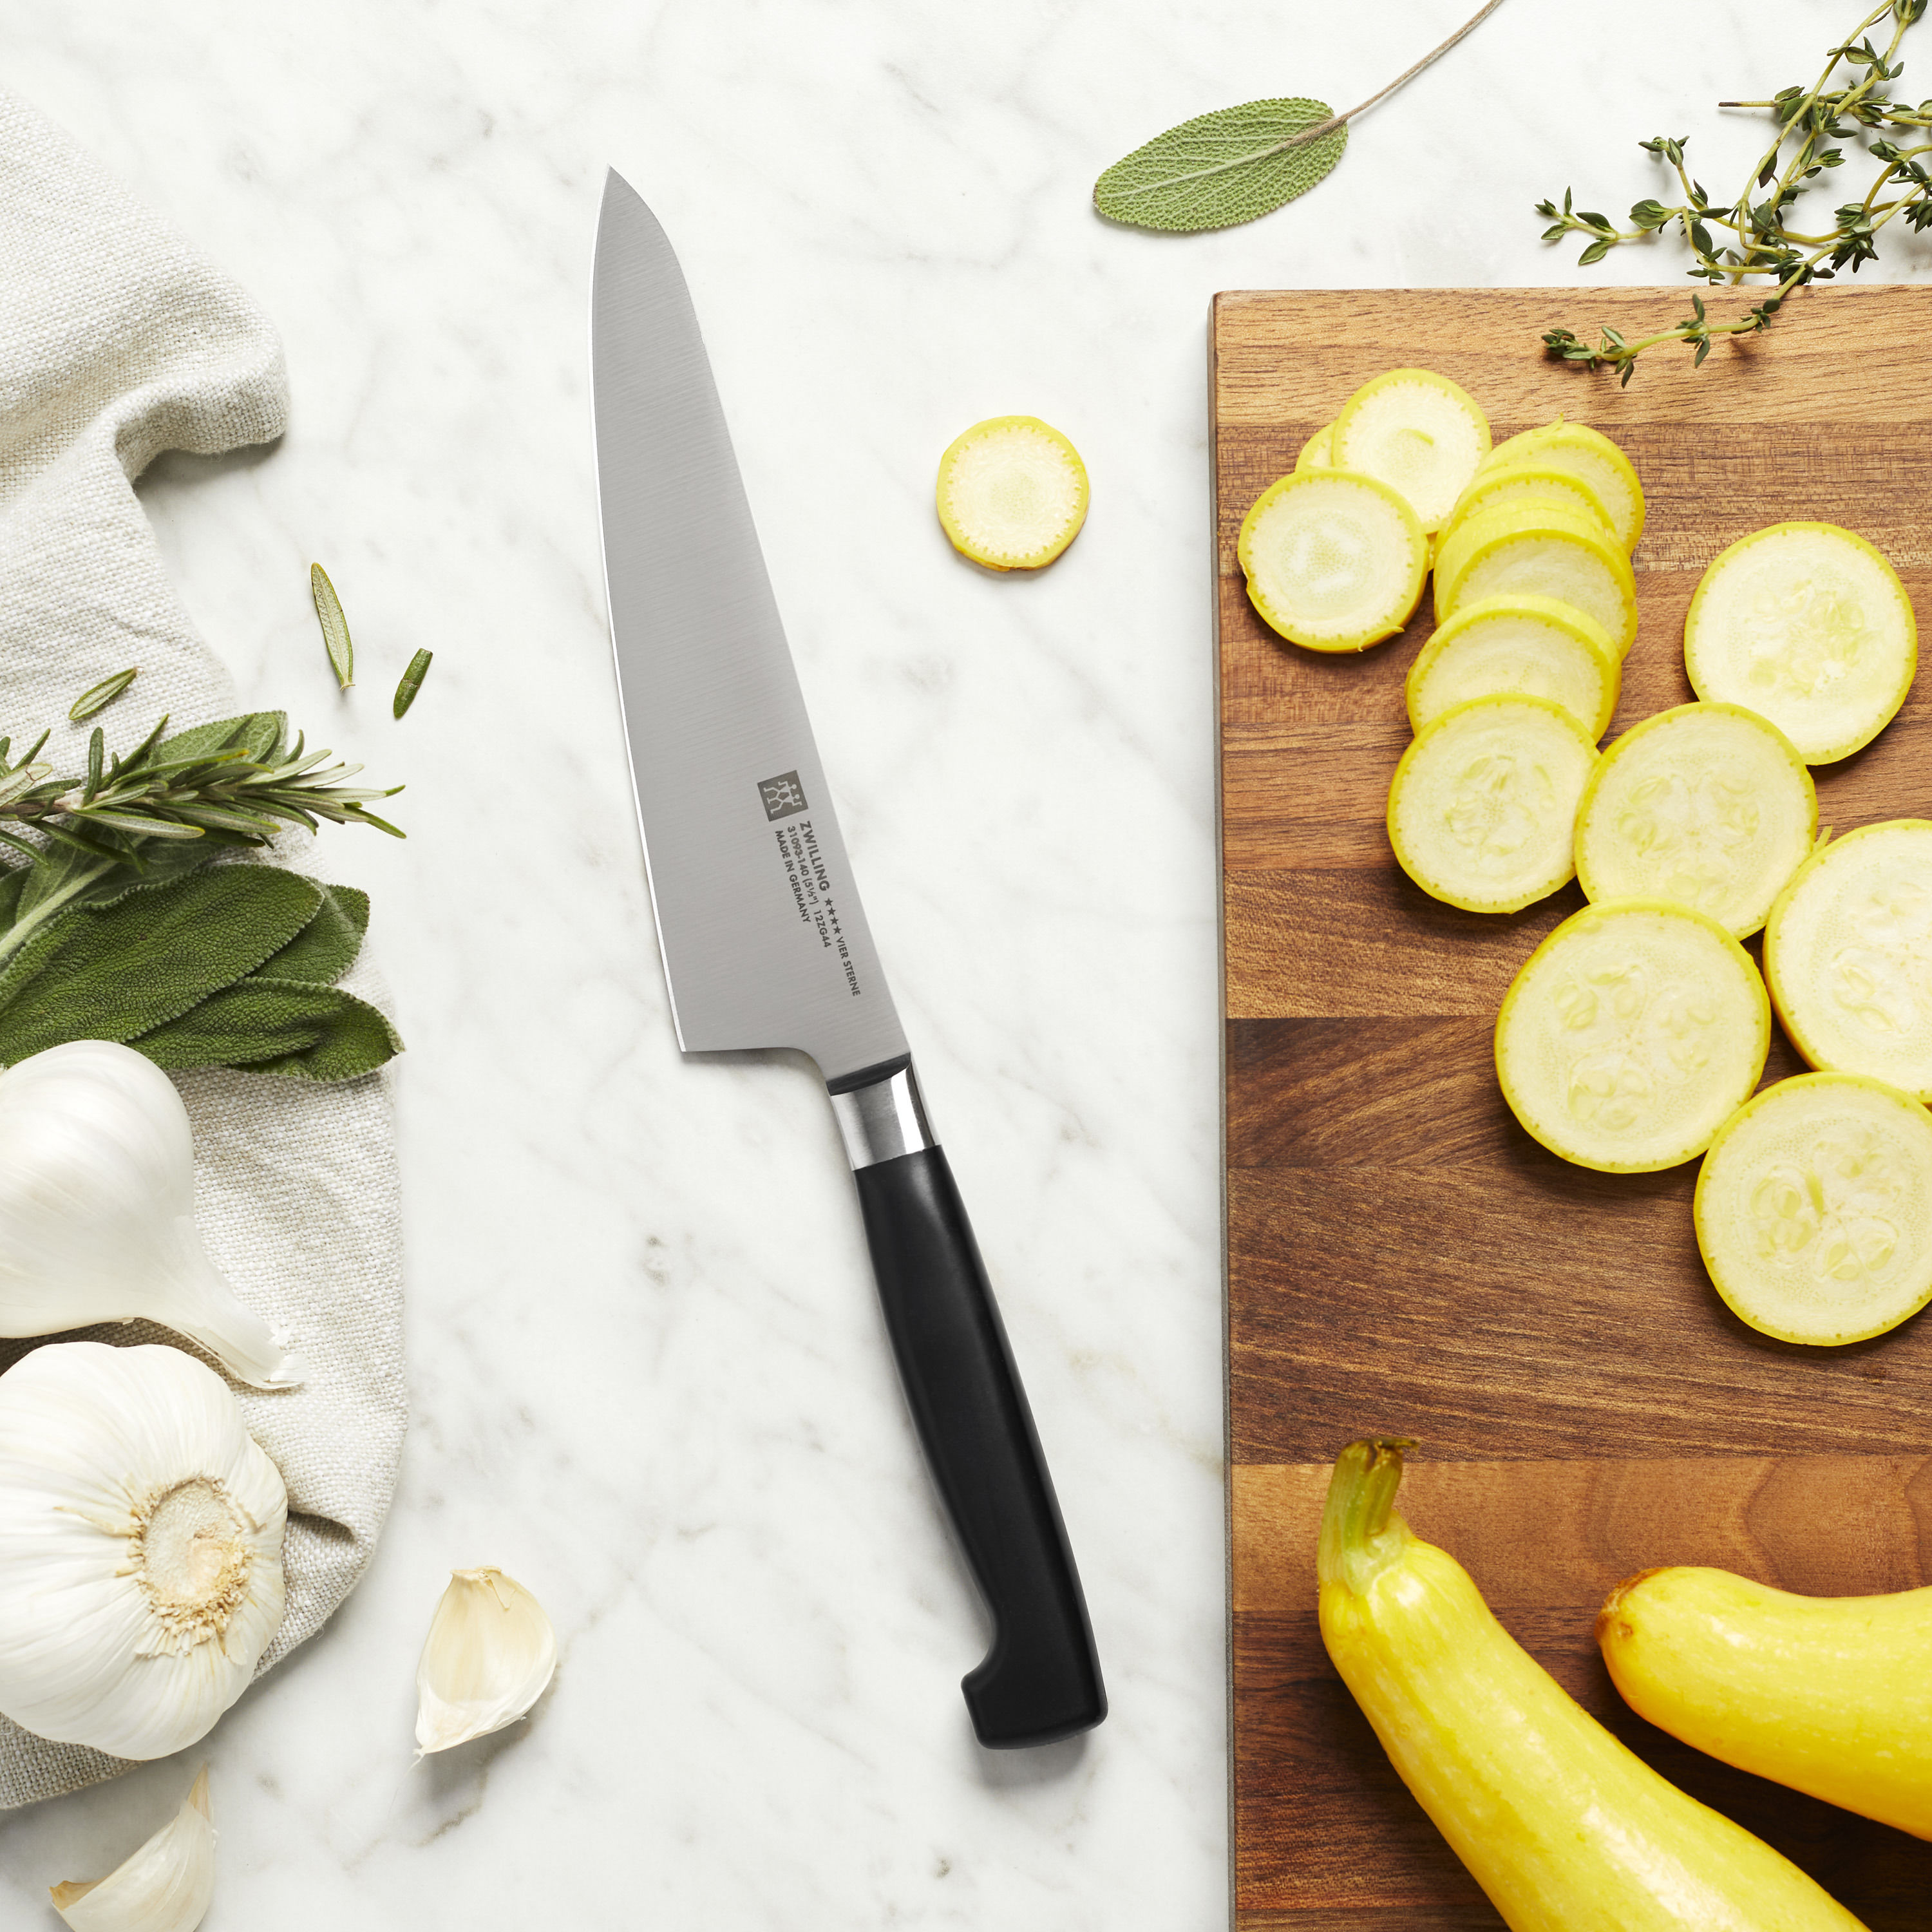 Buy ZWILLING **** Four Star Chef's knife compact | ZWILLING.COM